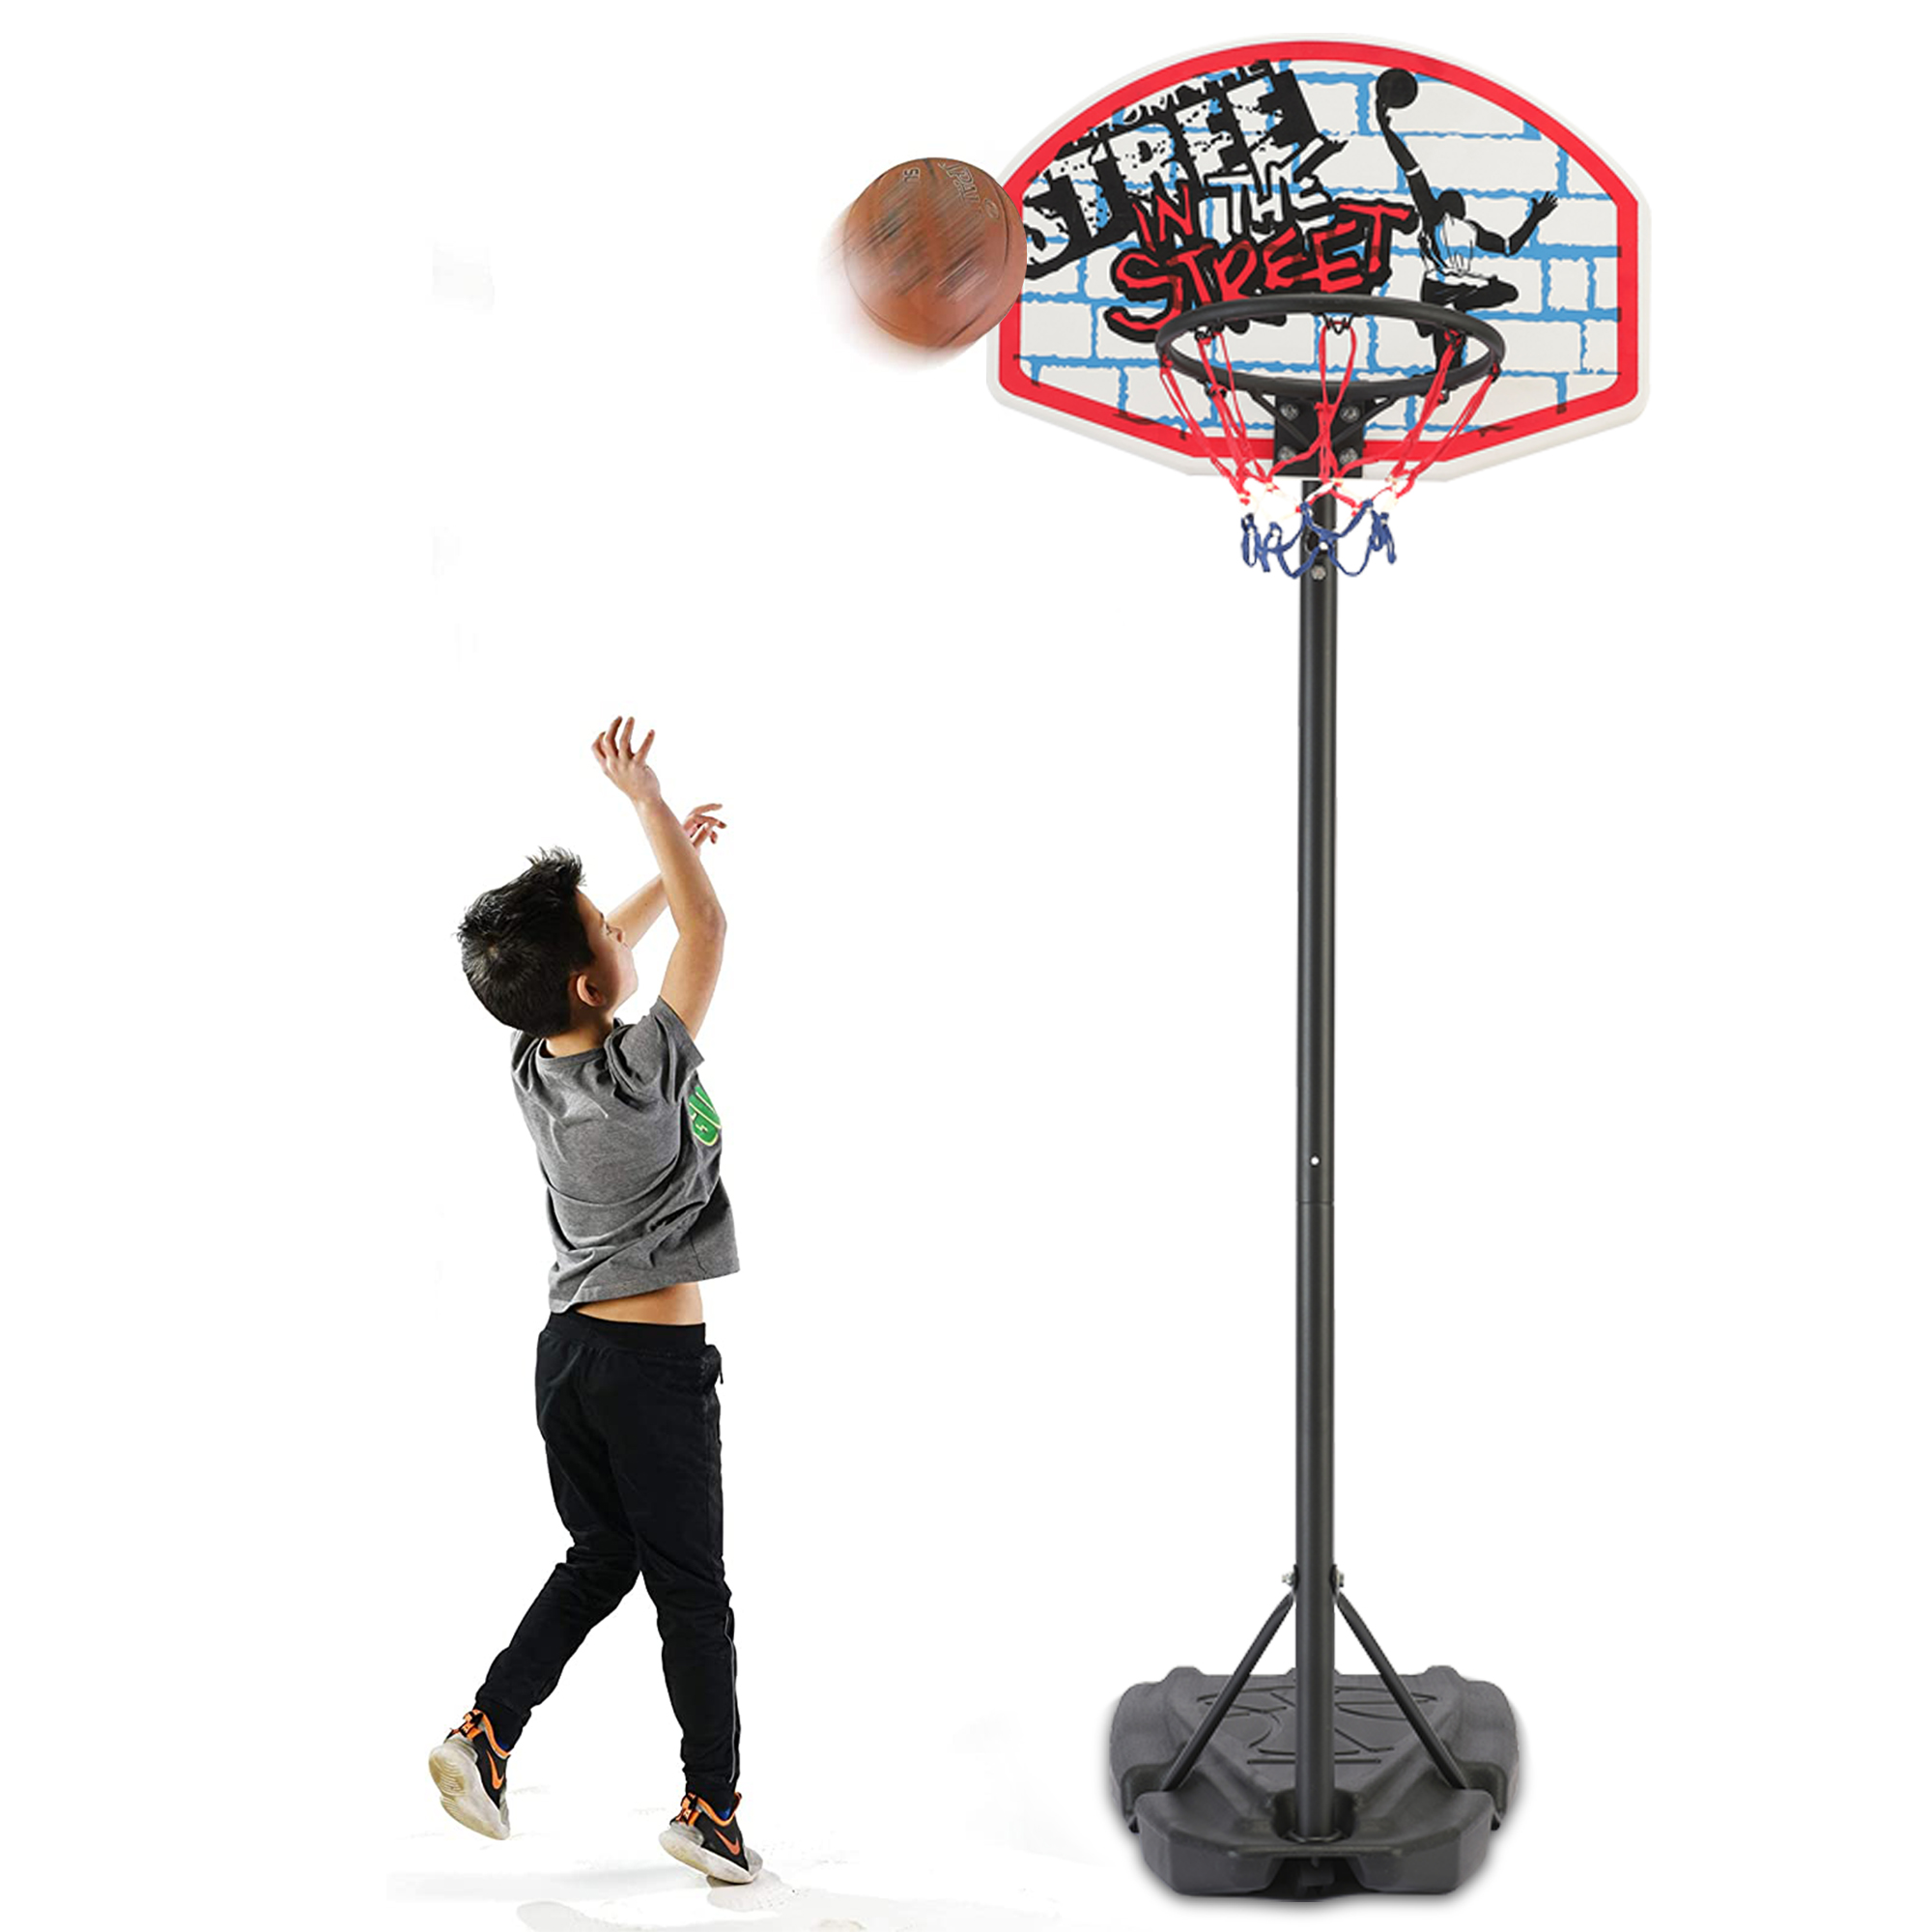 SYNGAR Portable Basketball Hoop on Wheels, 4.6-6.2ft Height Adjustable Basketball Hoop and Goal, Basketball Stand with Backboard, Indoor & Outdoor Basketball Play Set for Kids/Boys/Girls, D7714 - image 1 of 11